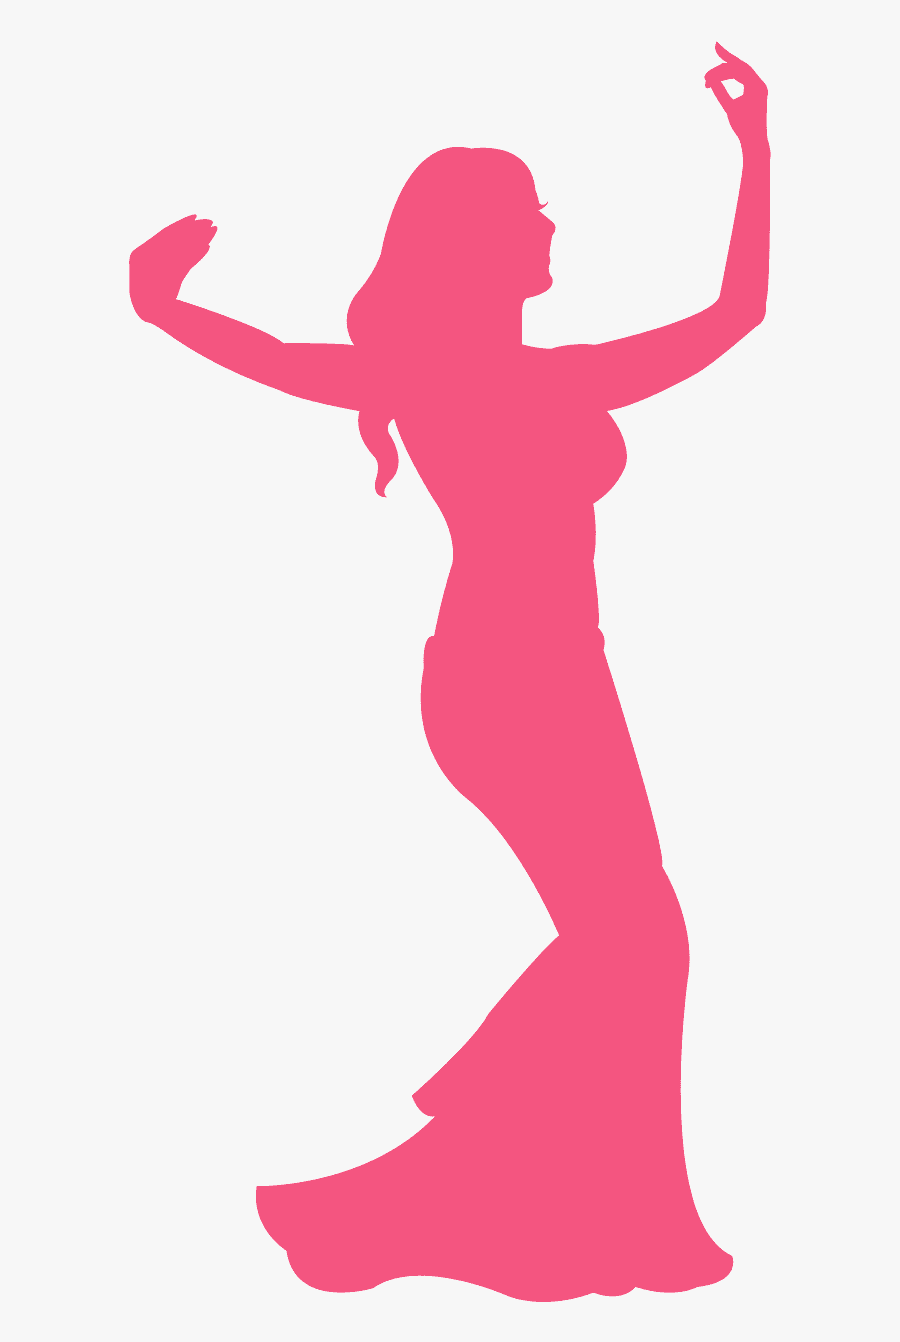 Belly Dance Silhouettes Png, Transparent Clipart